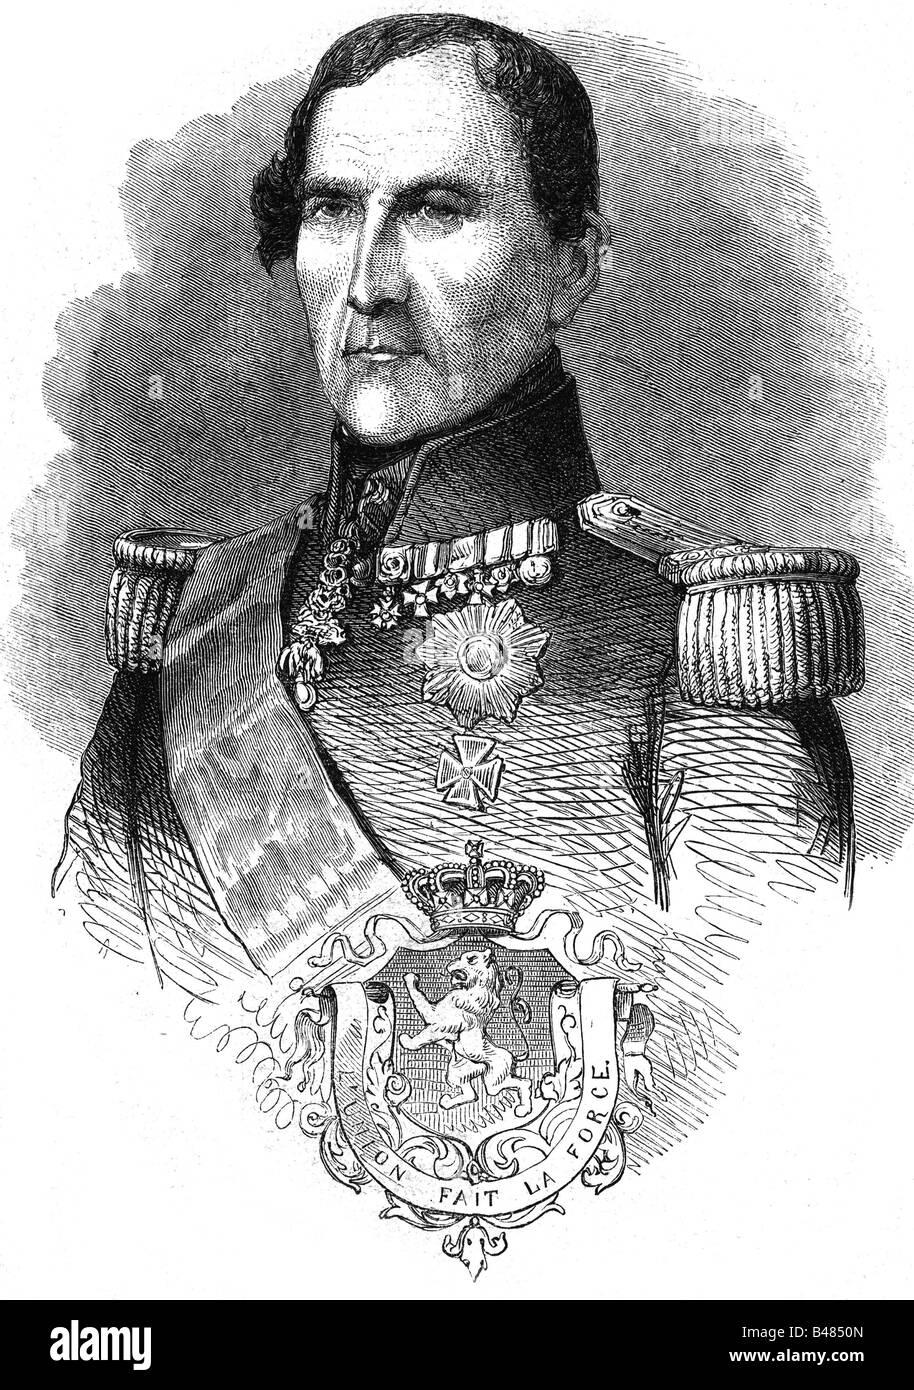 Leopold I., 16.12.1790 - 10.12.1865, King of the Belgians 31.7.1831 - 16.12.1865, portrait, wood engraving, 1859,  , Stock Photo